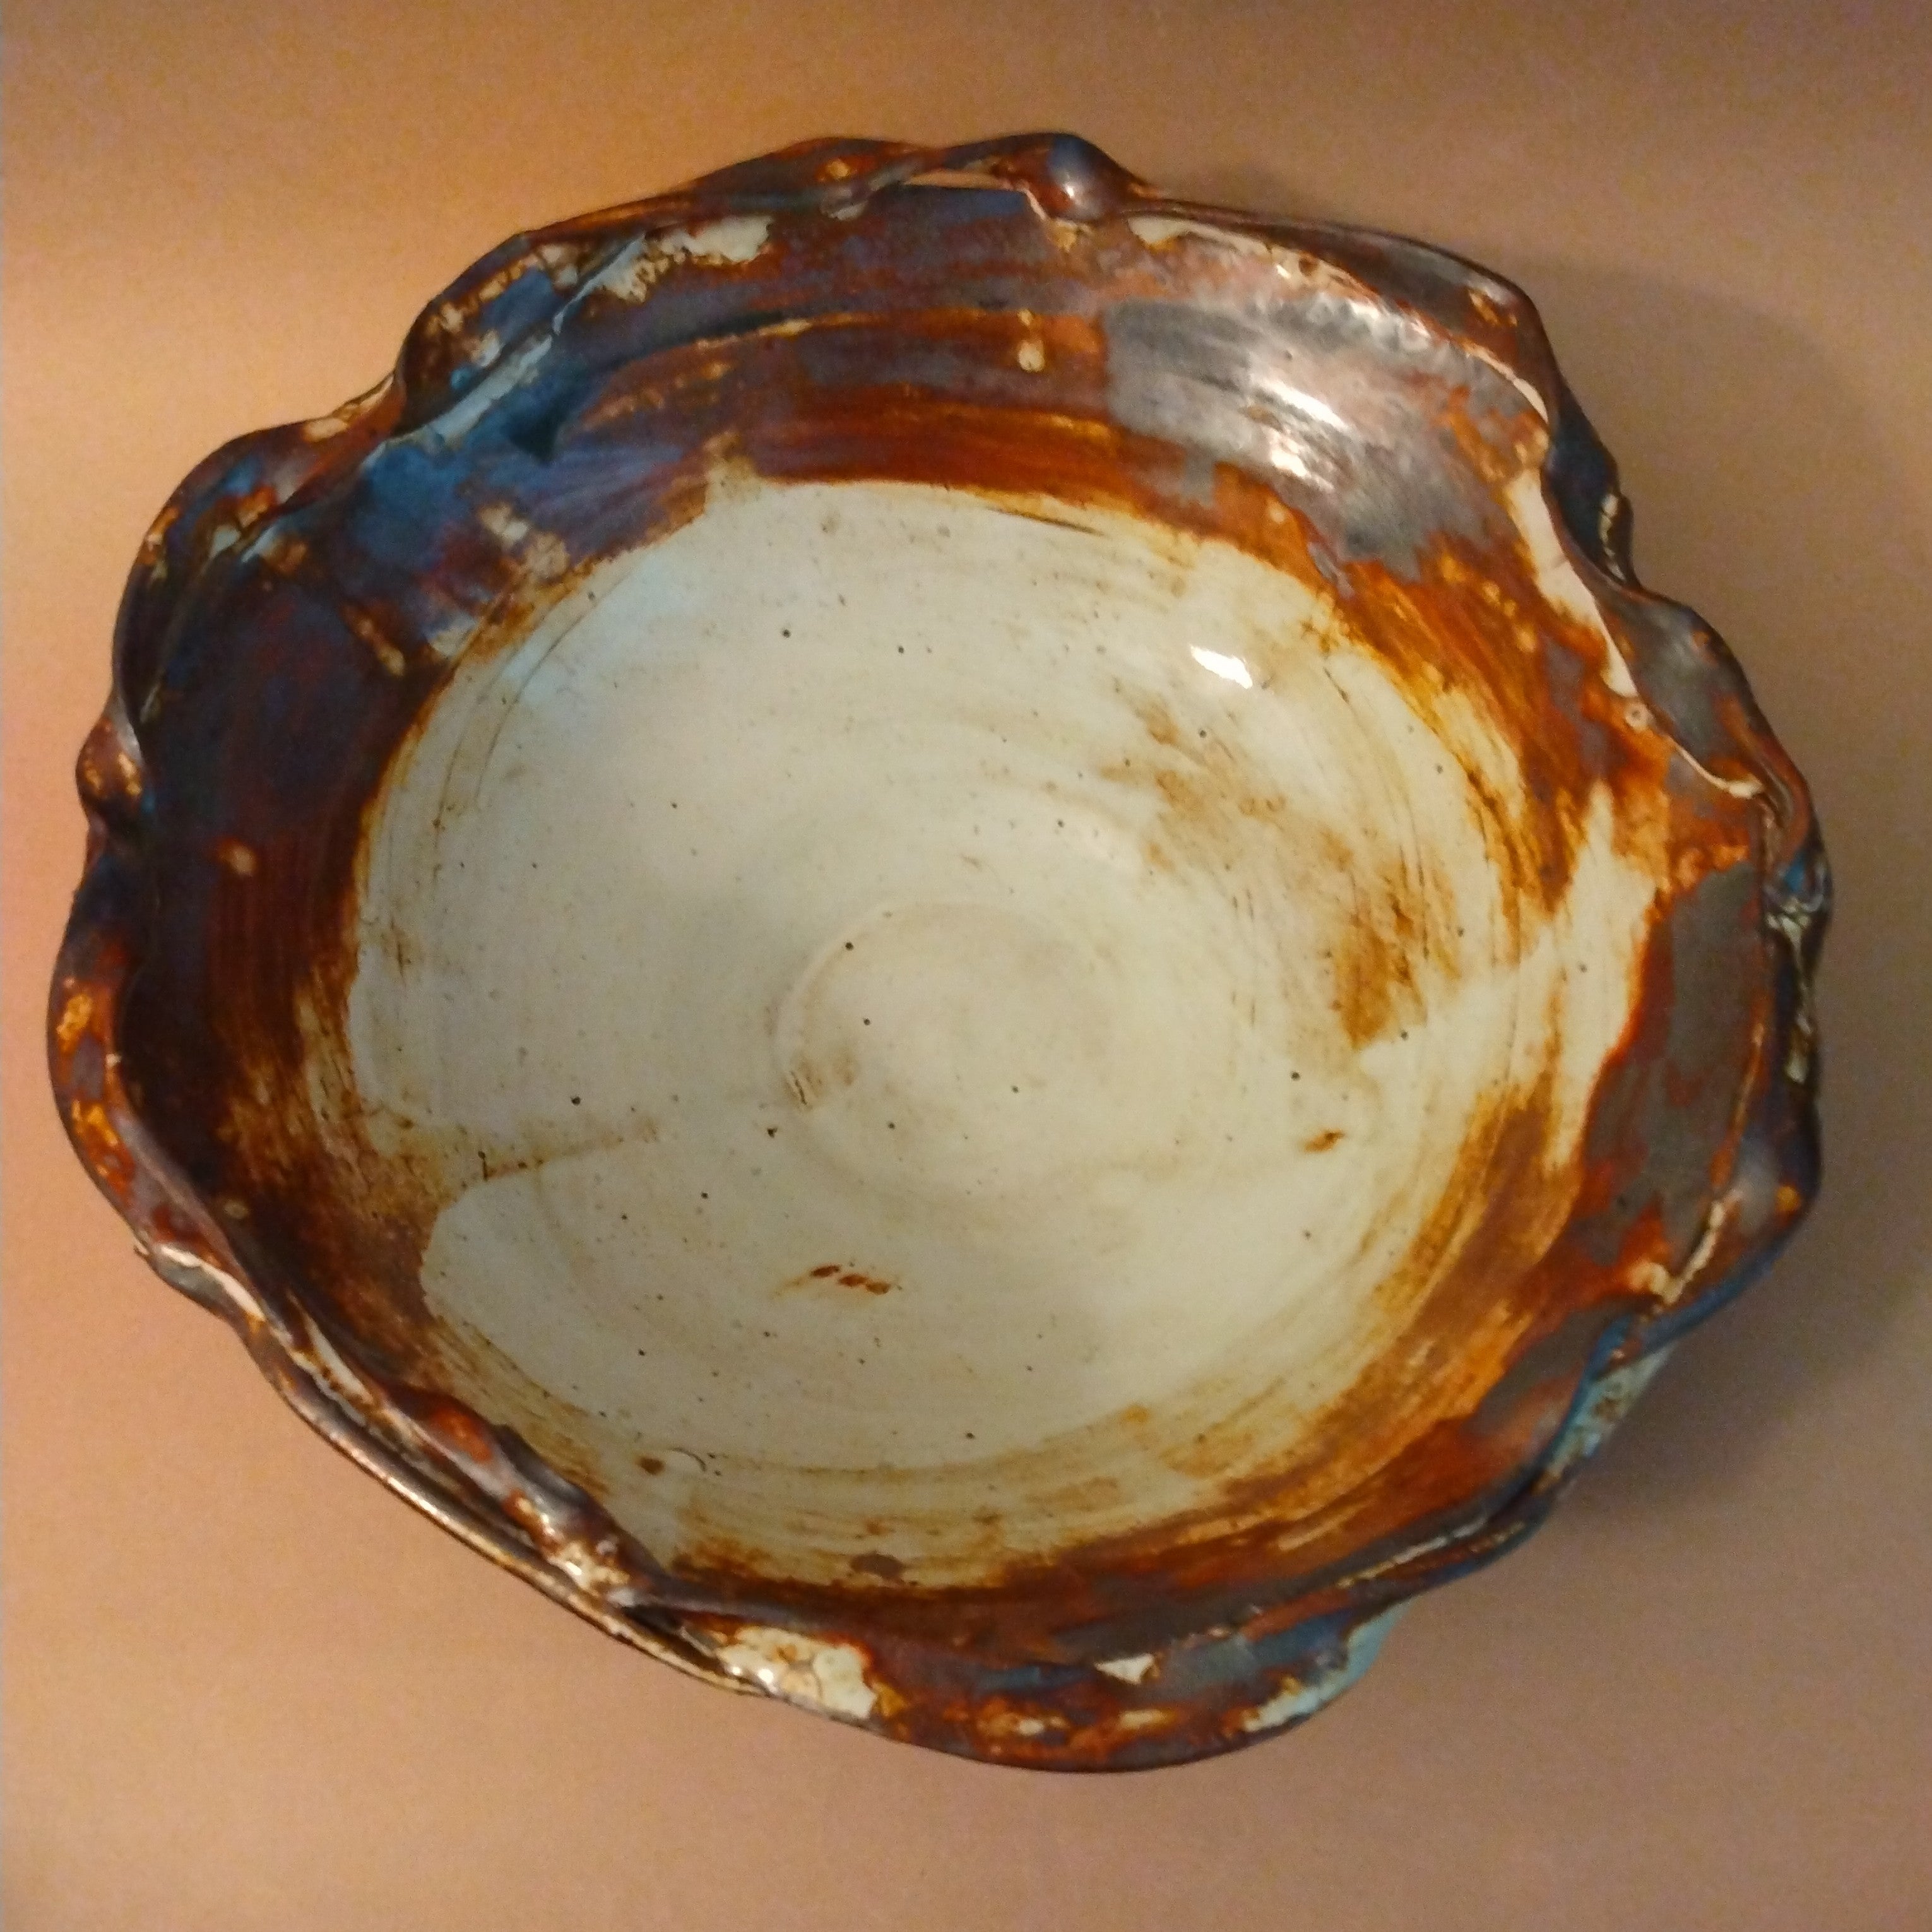 20% donated to Maui Wildfire Relief - Bamboo Ash and Shino Glazed Serving Bowl by Sachiko Furuya